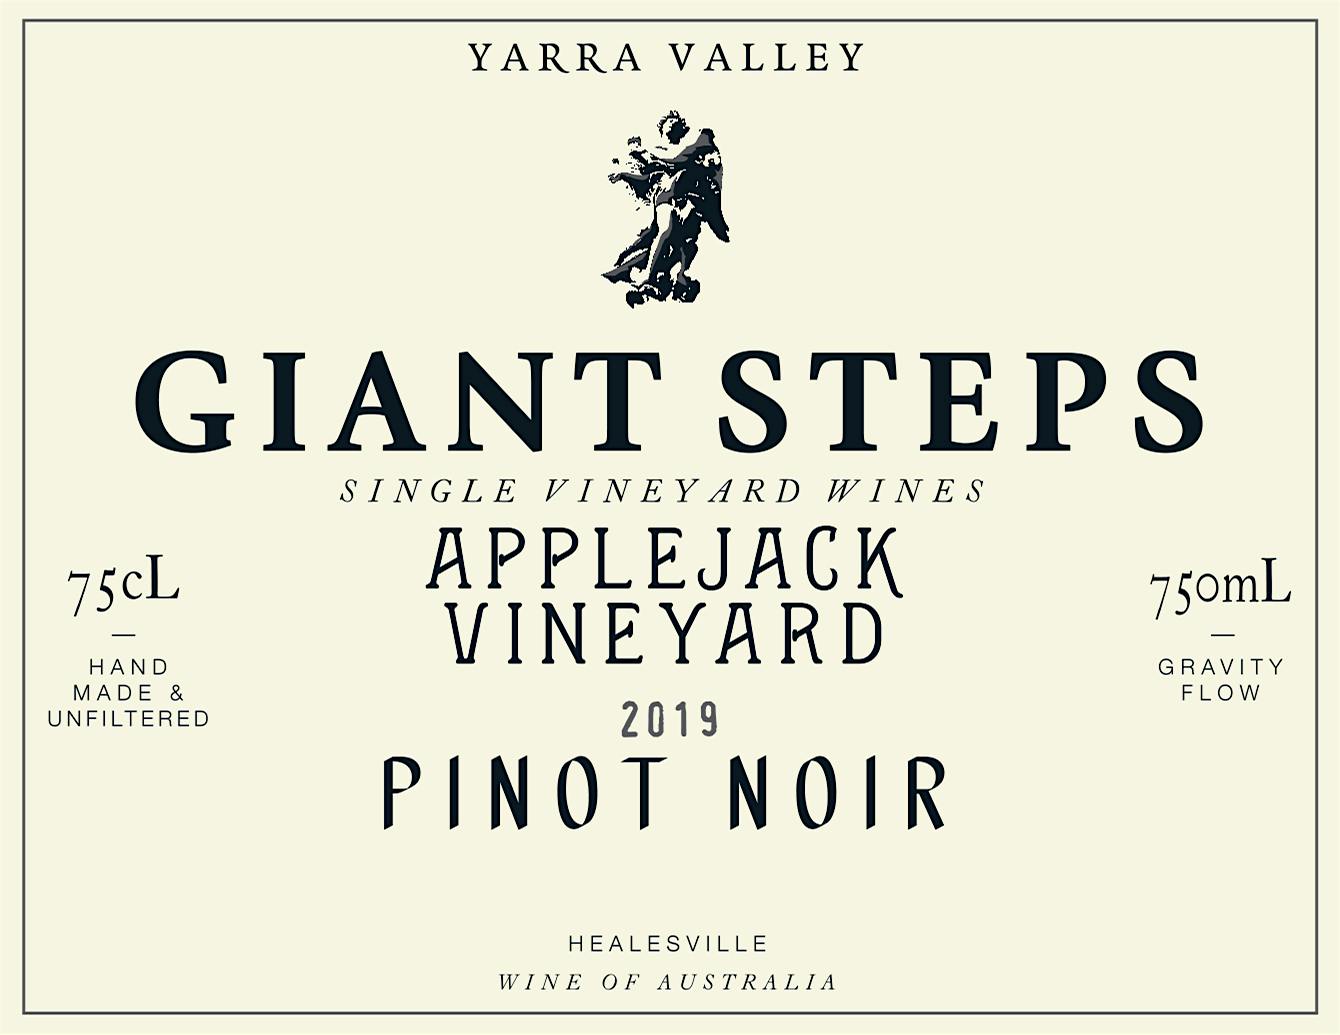 Label for Giant Steps